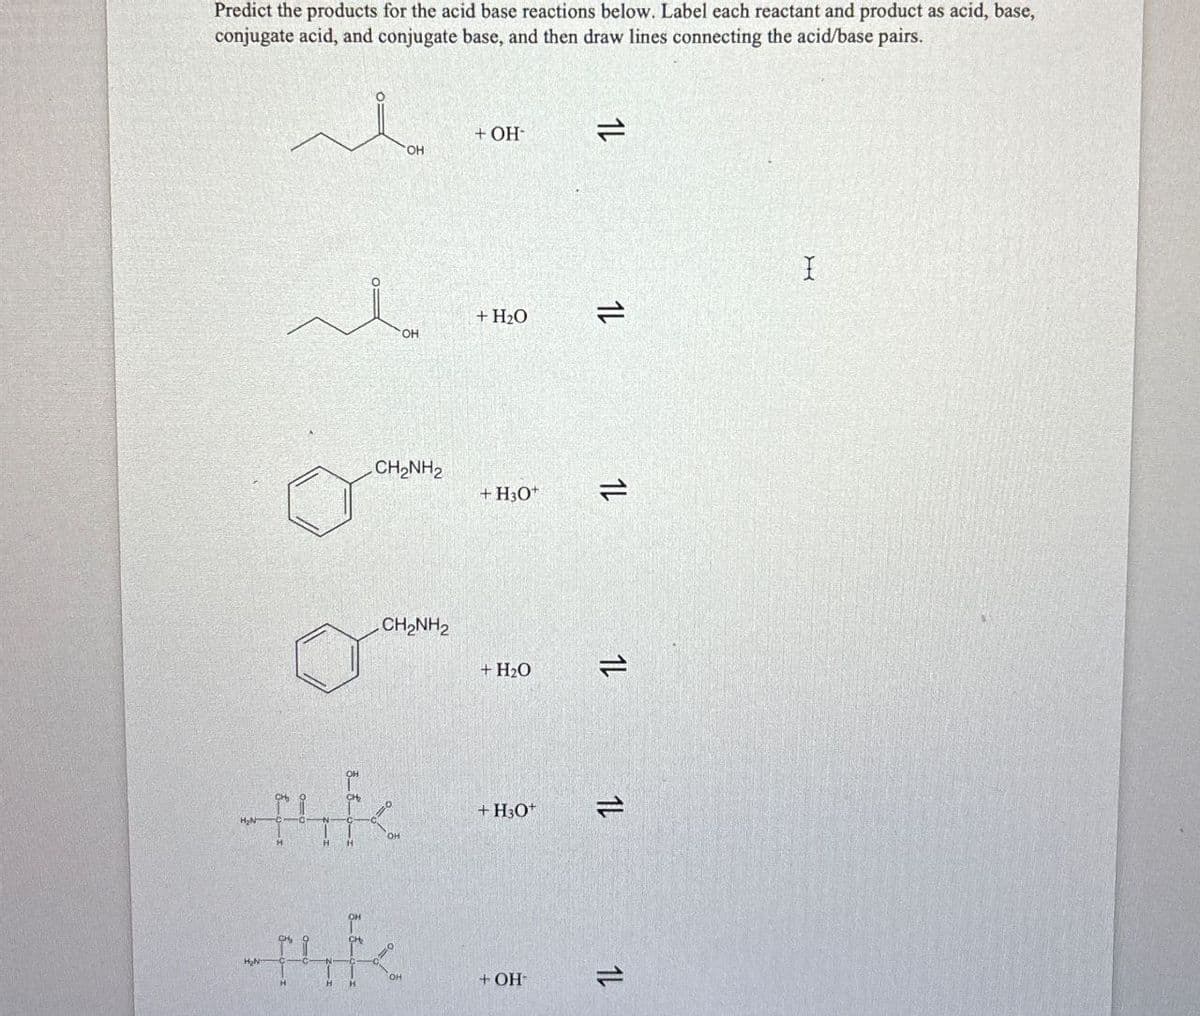 Predict the products for the acid base reactions below. Label each reactant and product as acid, base,
conjugate acid, and conjugate base, and then draw lines connecting the acid/base pairs.
+ OH-
14
OH
OH
+ H₂O
CH2NH2
+H3O+
CH2NH2
+ H₂O
=2
1L
1L
1L
4k
OH
-uk
H₂N
OH
+H3O+ 12
+ OH
1L
I